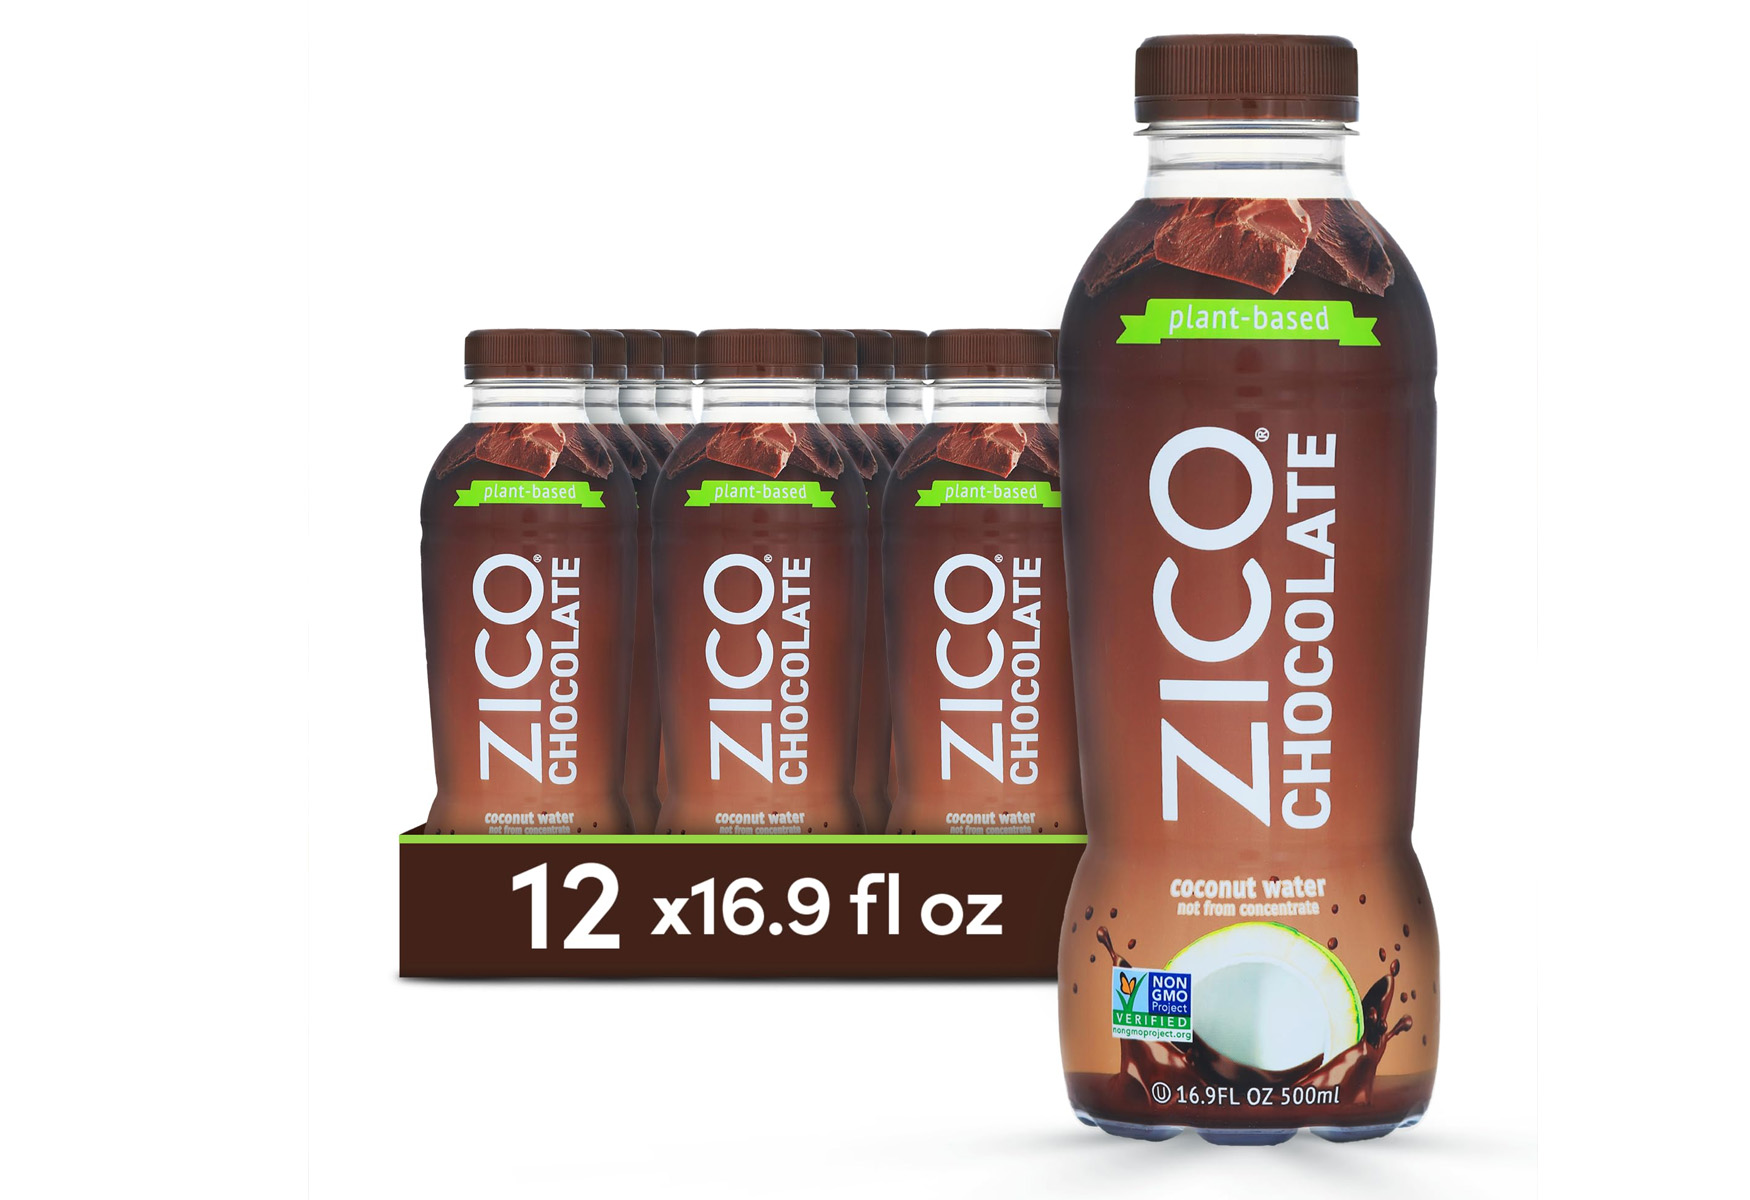 19-zico-chocolate-coconut-water-nutrition-facts